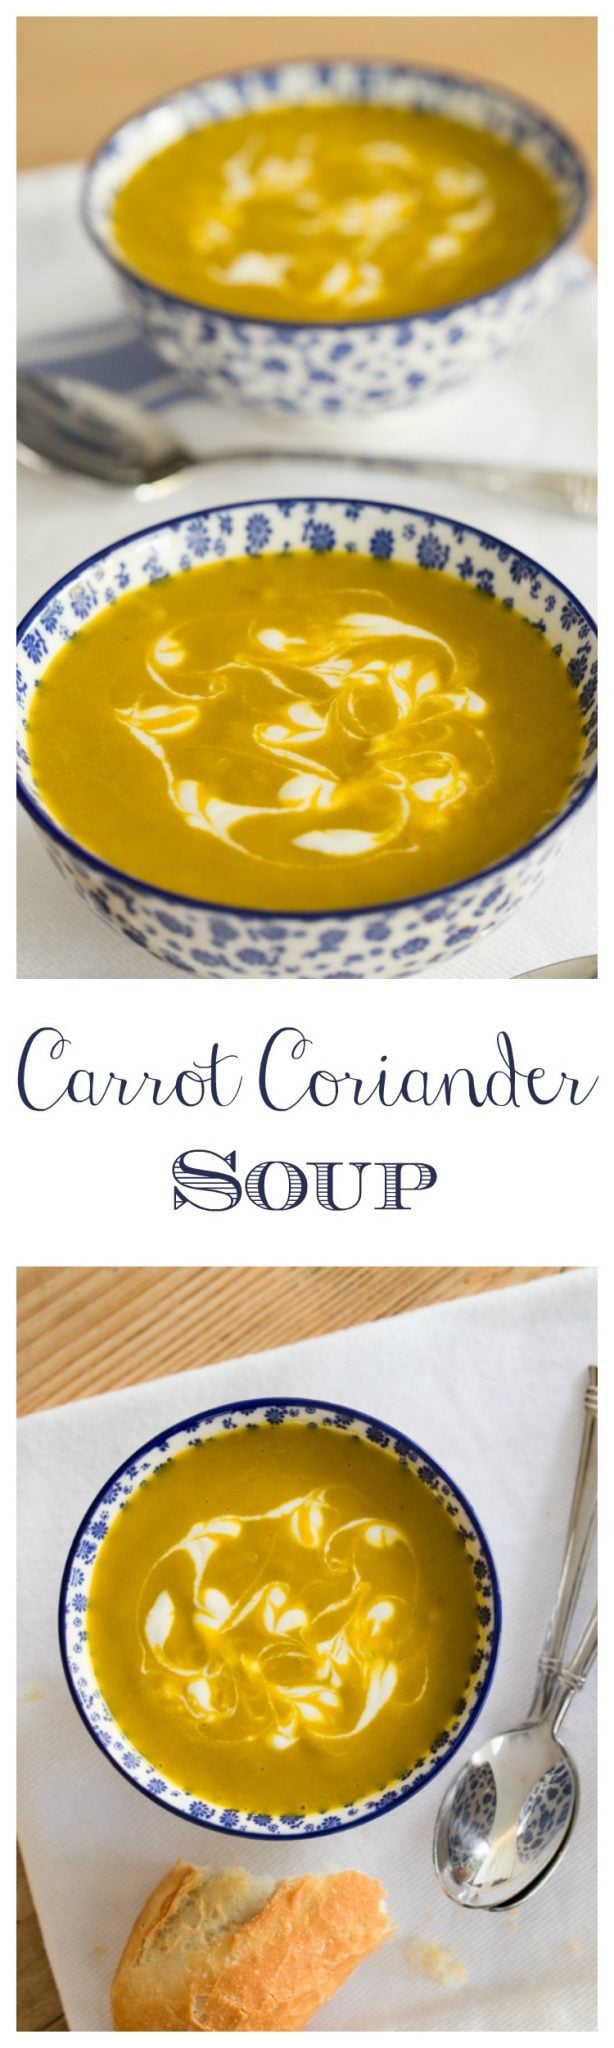 Carrot Coriander Soup - super healthy and crazy delicious, this beautifully-hued soup is sure to become a favorite with young and old alike!